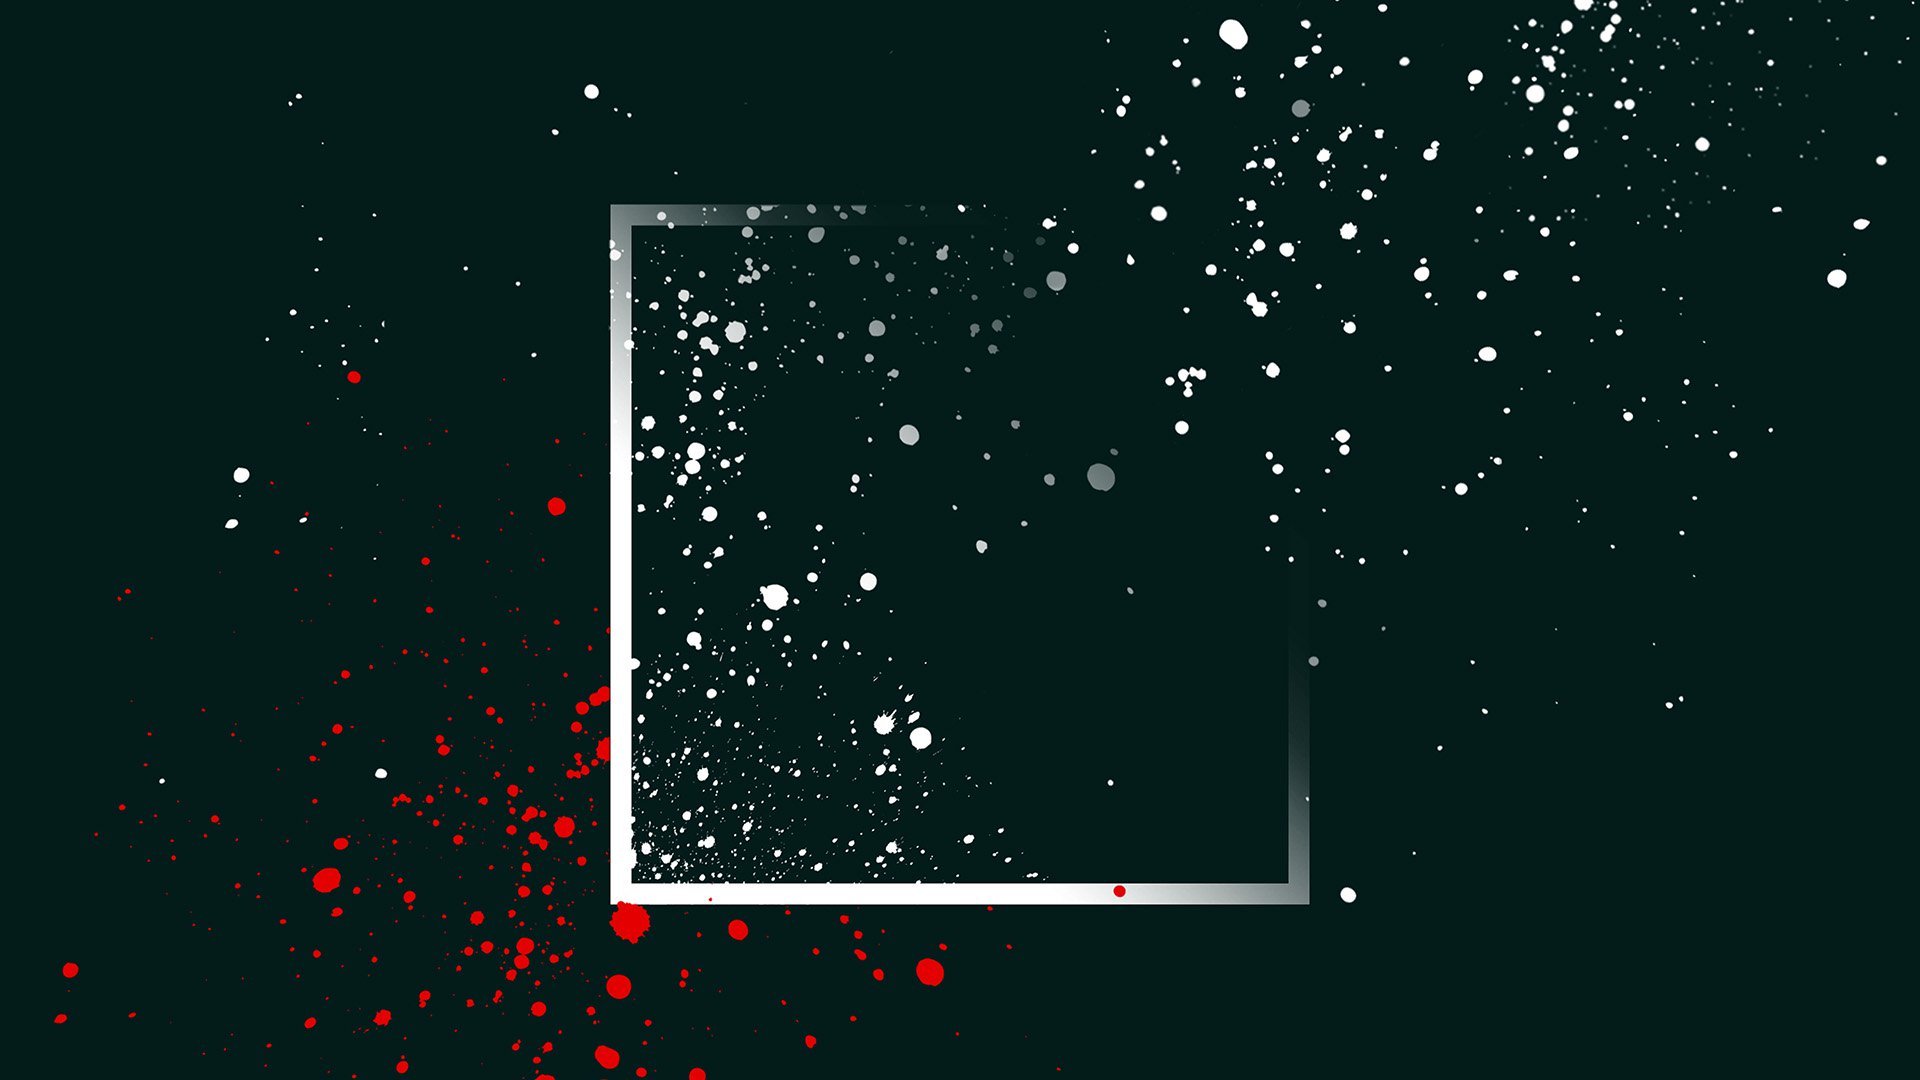 abstract, Minimalism, Square, Paint splatter, Simple background, Dots, Digital art, Black, White, Red Wallpaper